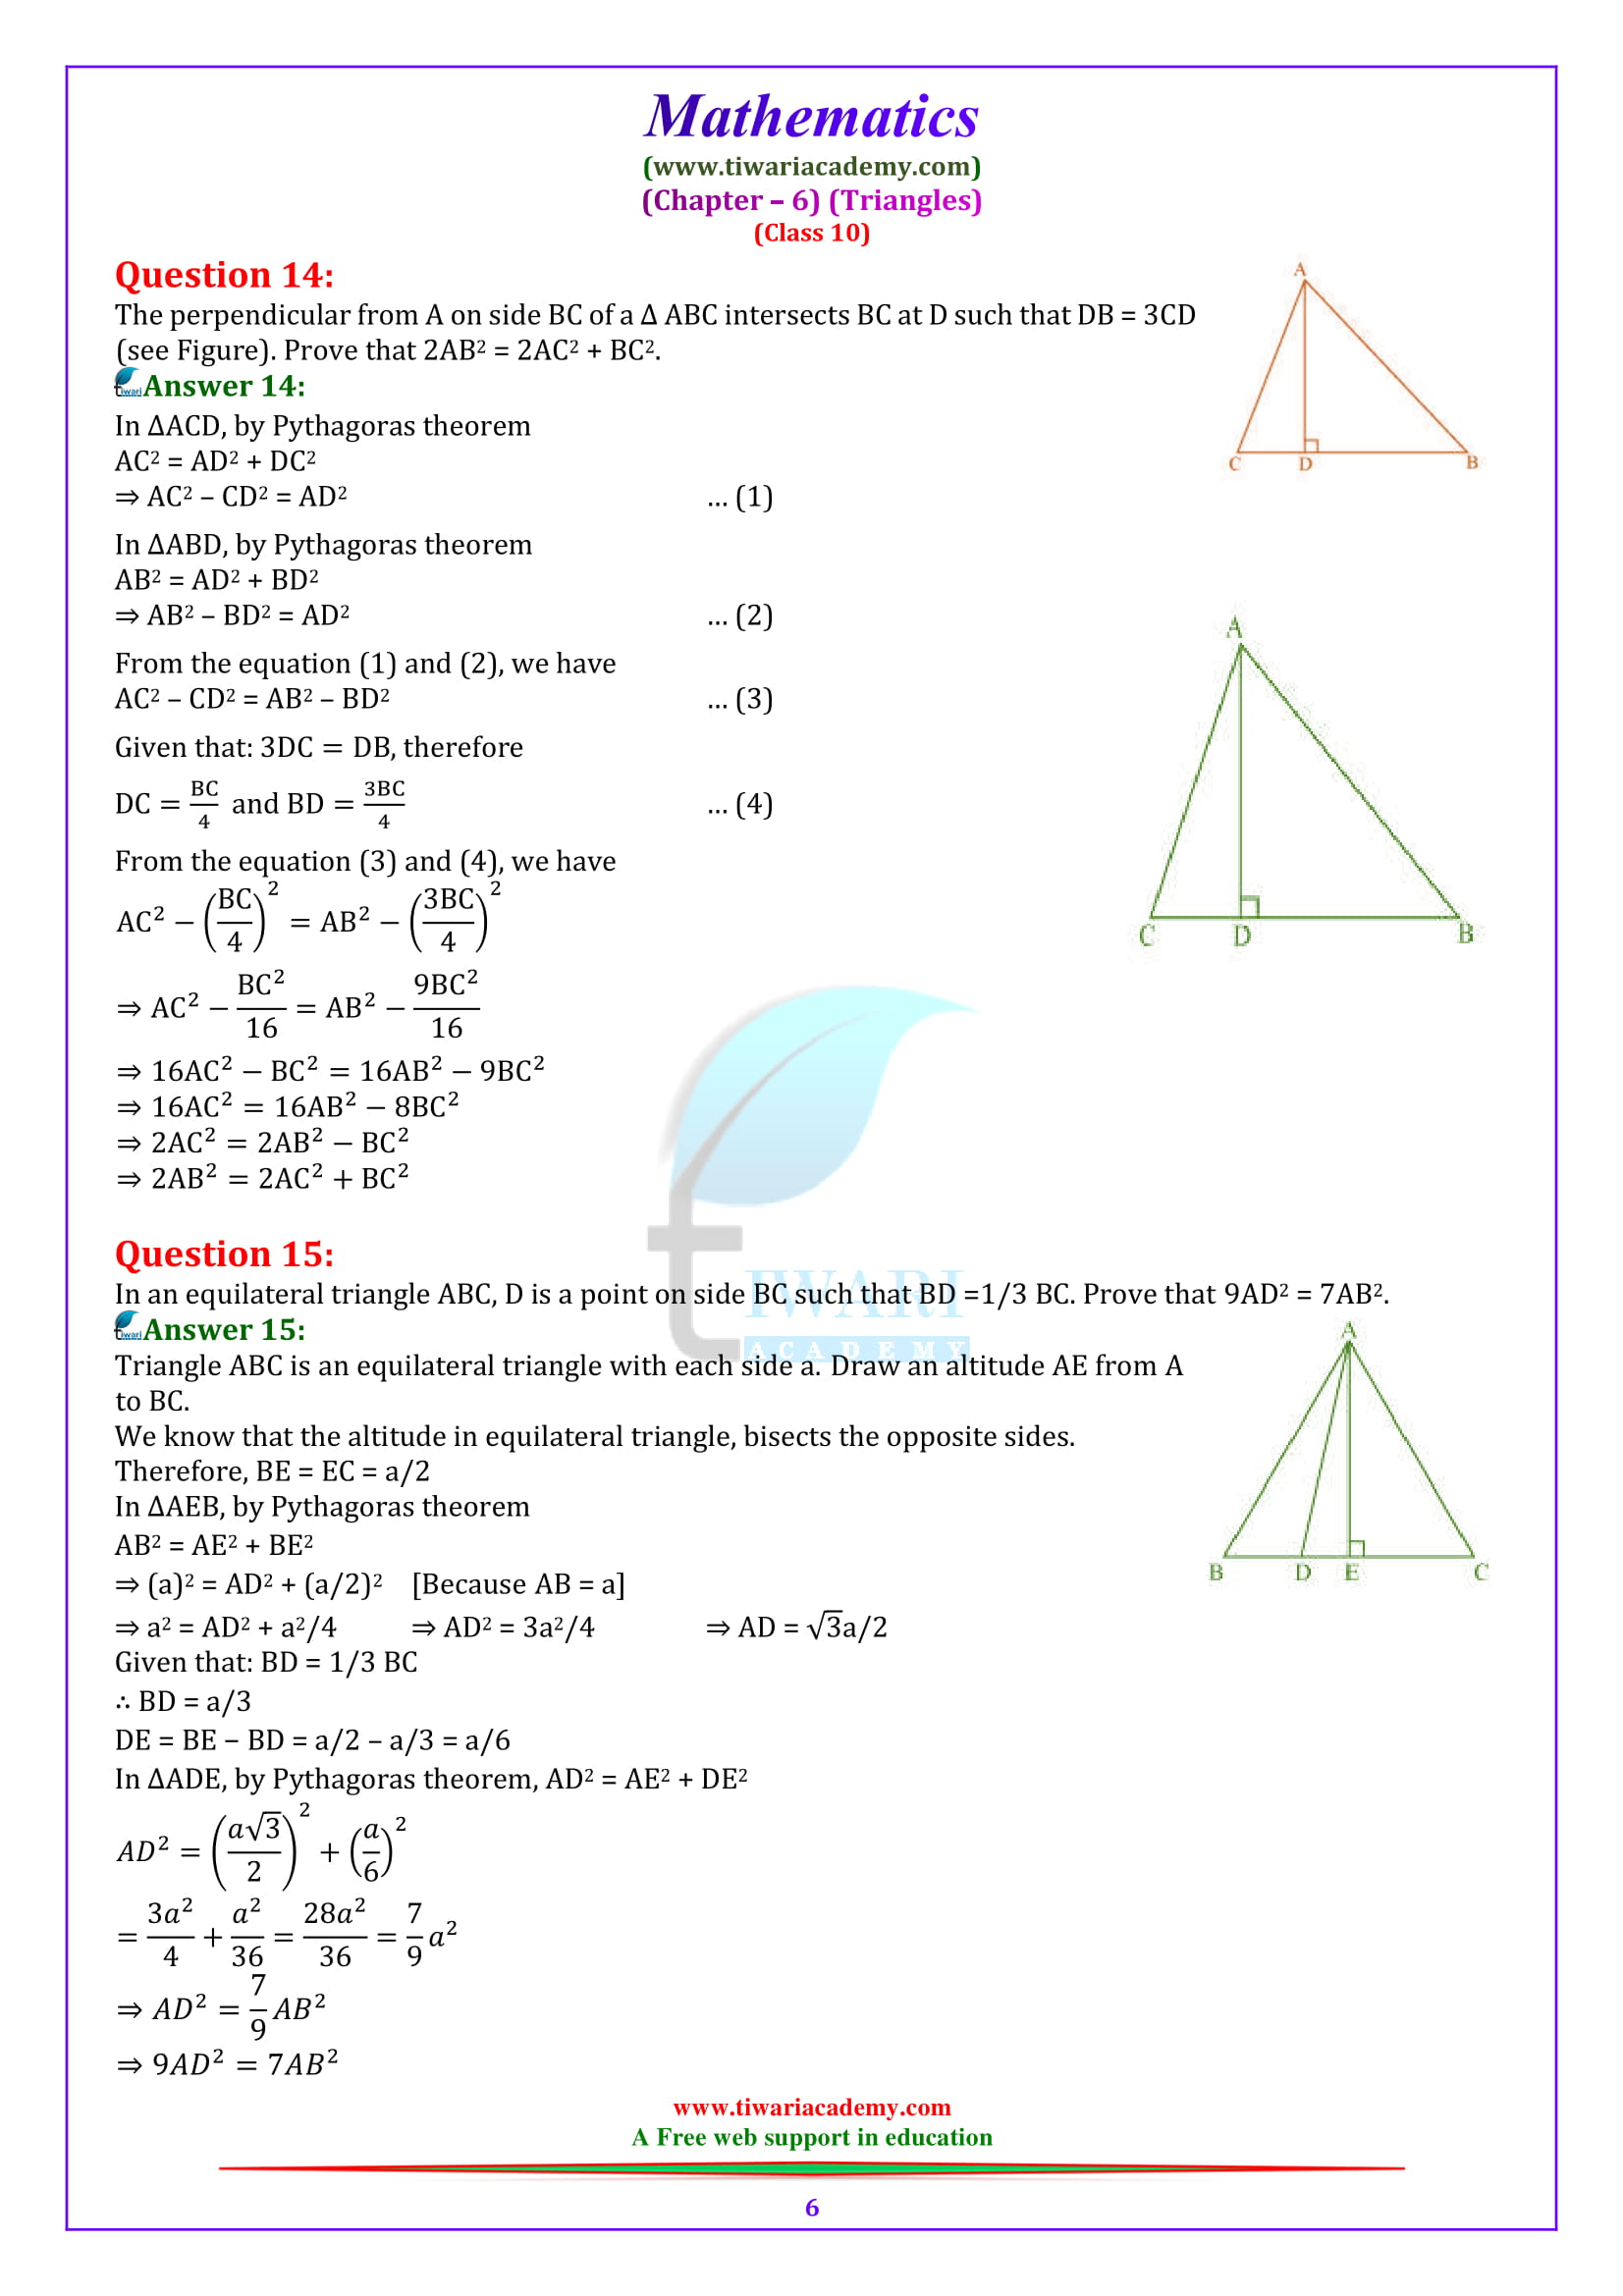 10 Maths Exercise 6.5 Solutions question 14, 15, 16